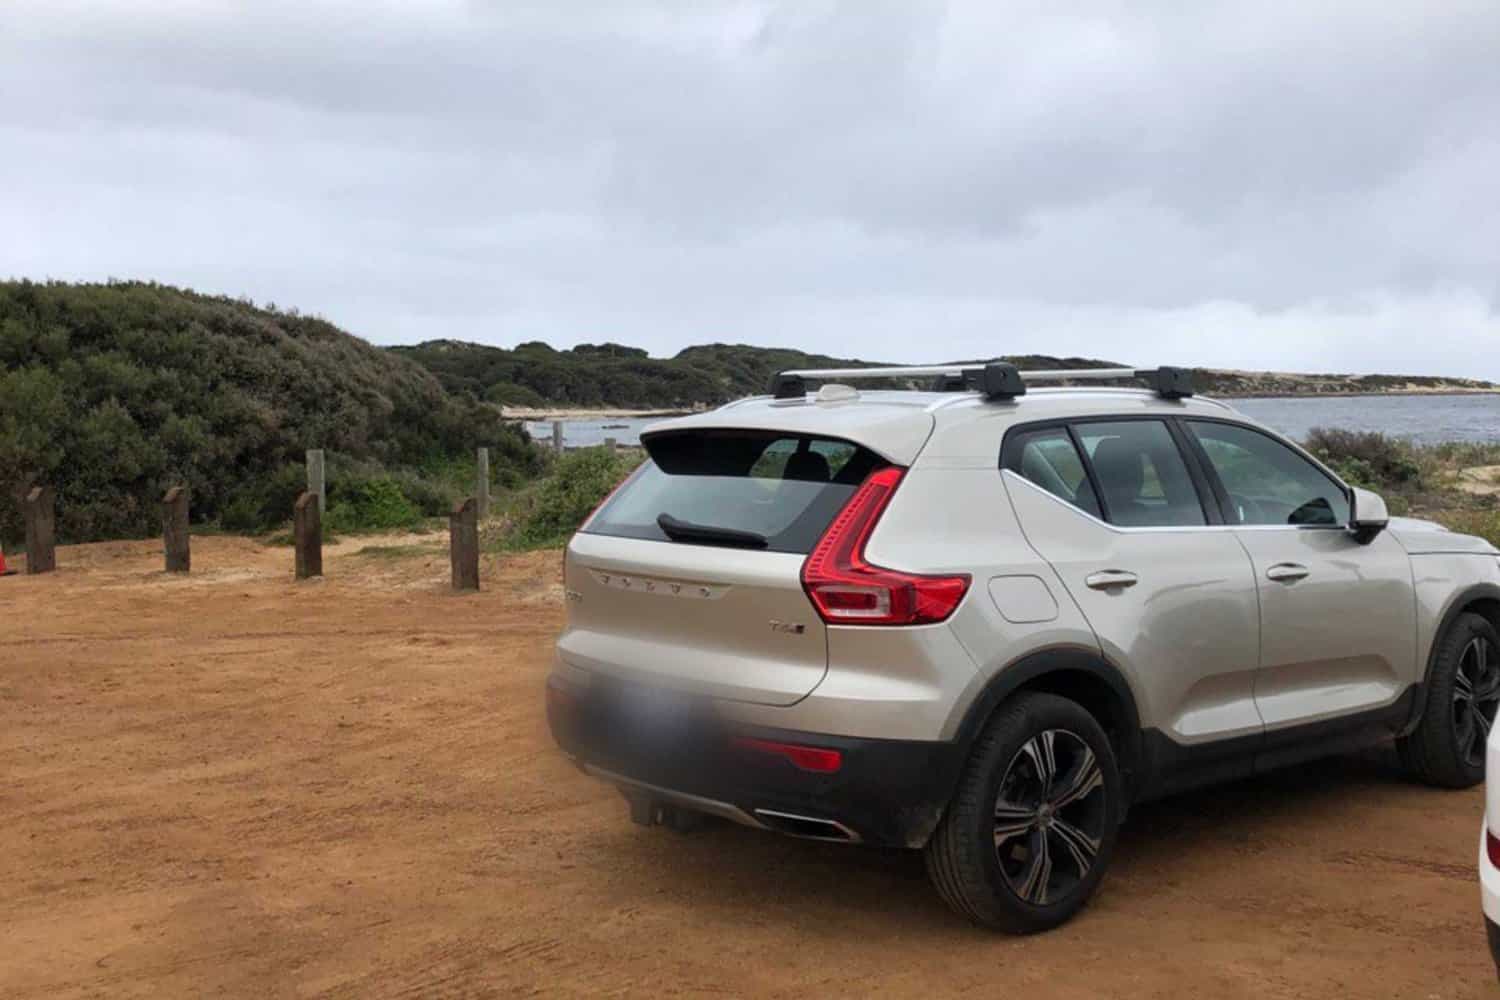 A silver Volvo XC40 parked on a sandy lot near a coastal area, with dense shrubbery and a glimpse of calm sea waters in the background, typical of a serene beachside parking area in Australia.